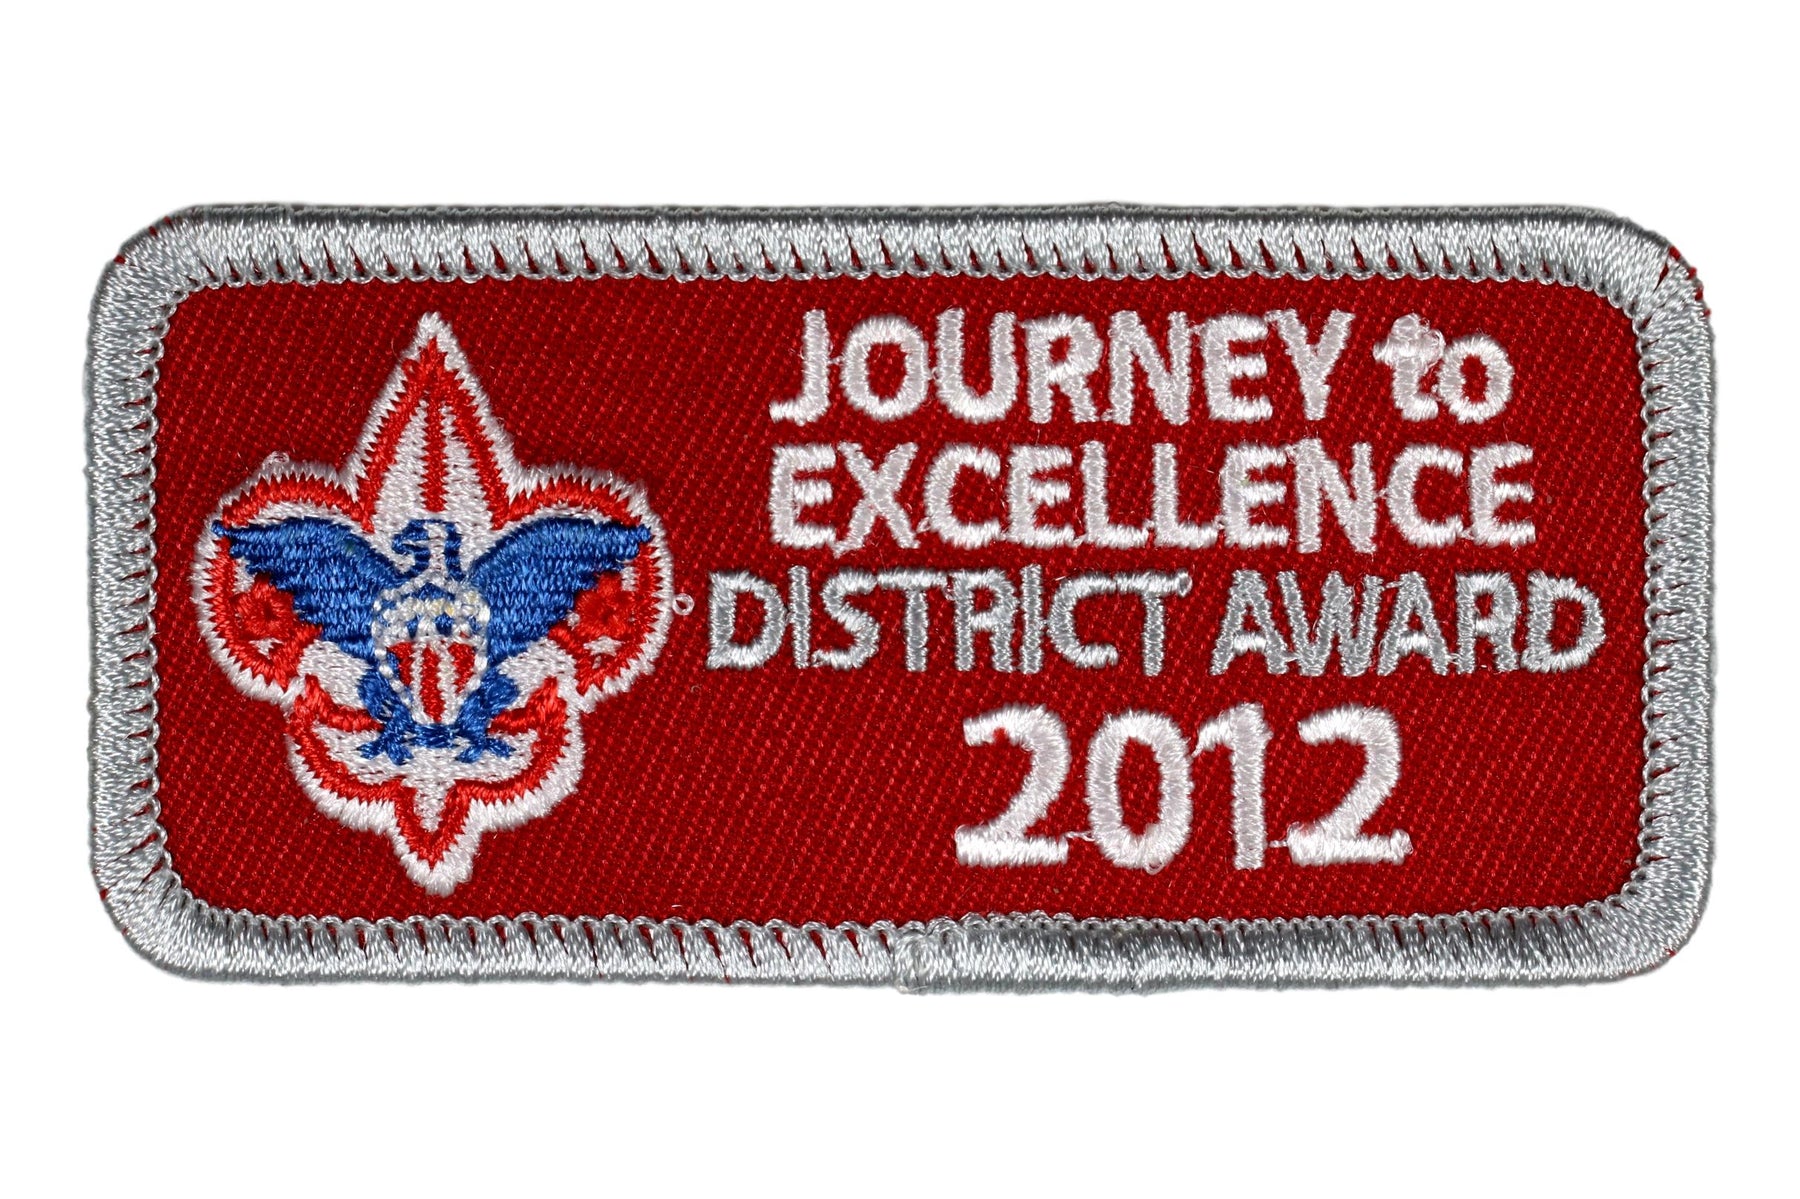 2012 District Journey to Excellence Award Silver Patch